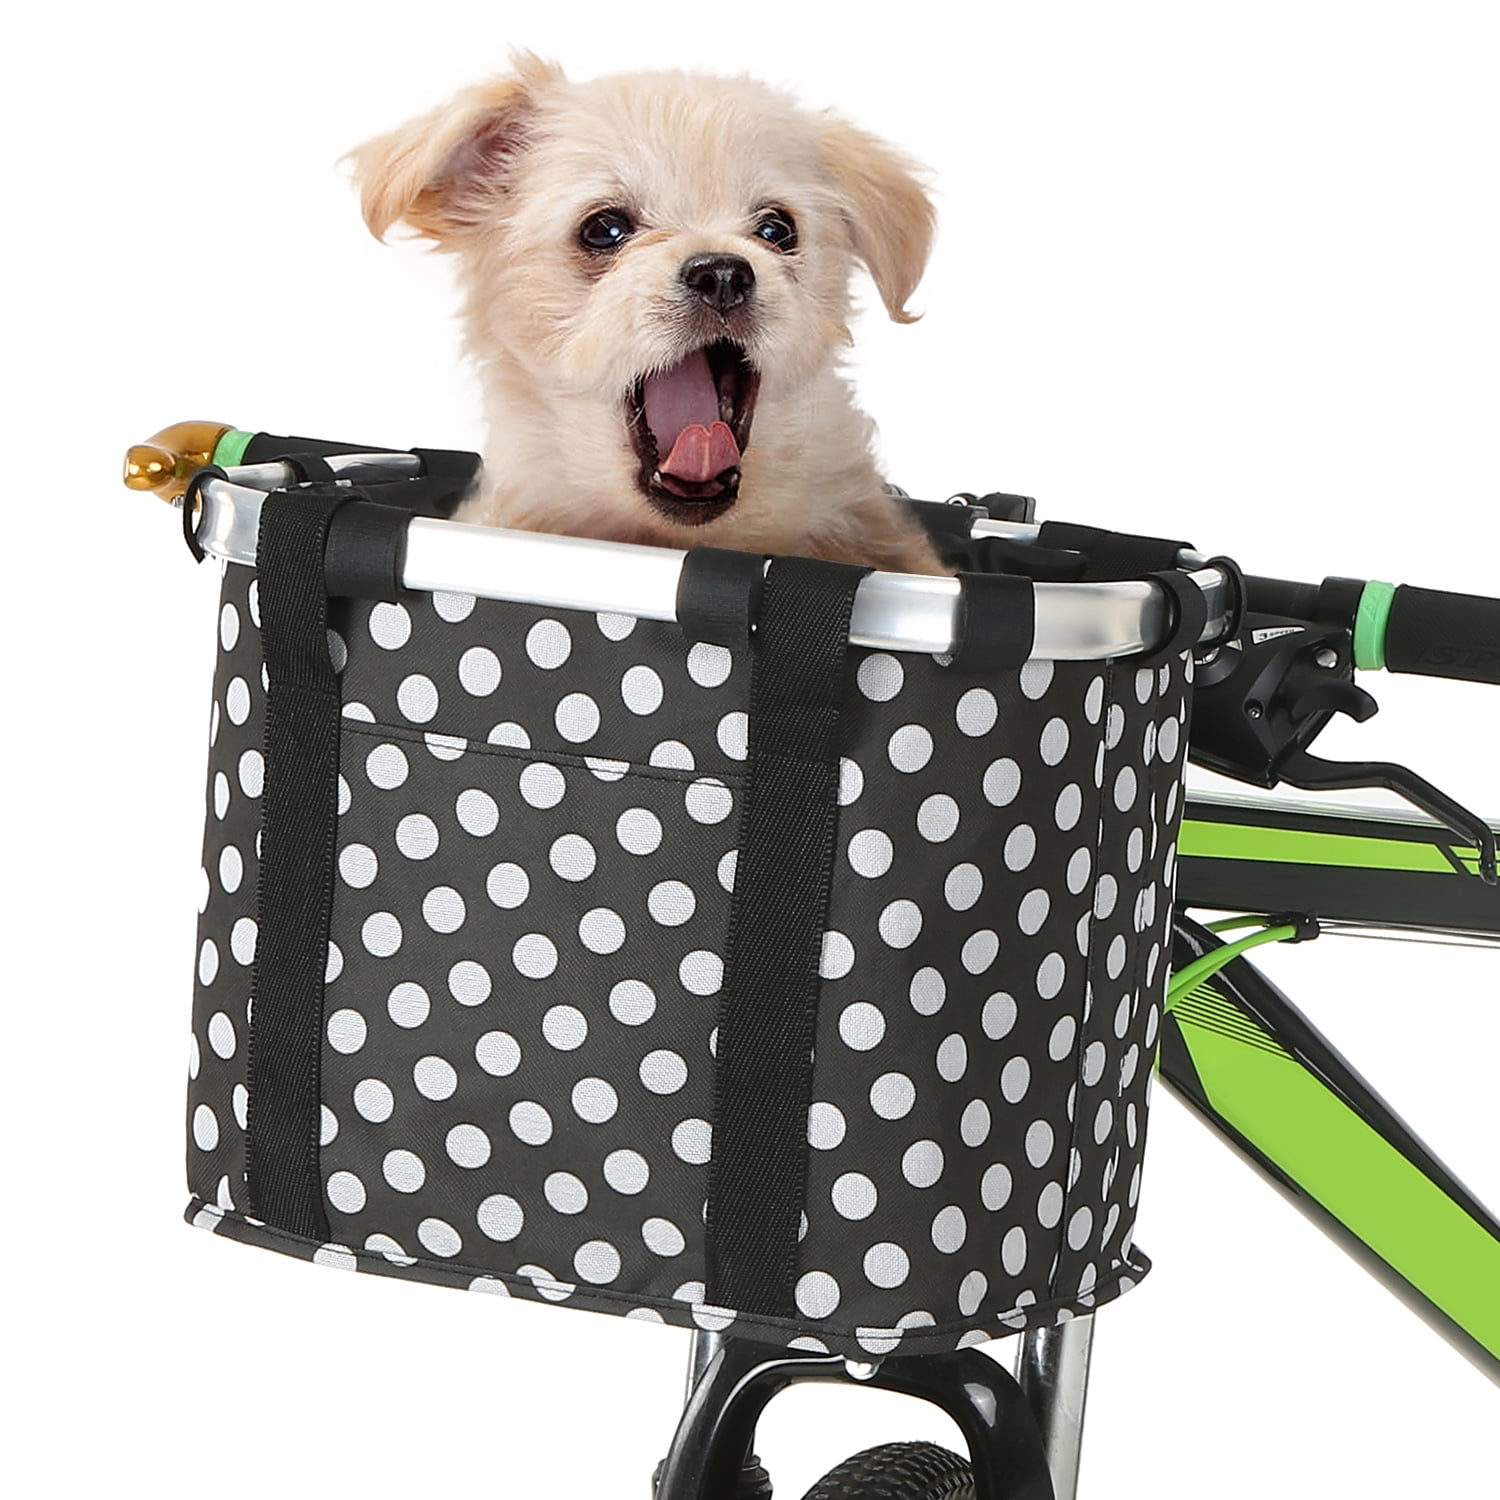 Portable Collapsible Dog Cat Bicycle Front Basket Bike Handlebar Carrier Cage for up to 22lbs Pet Folding Detachable Cycling Bag Black